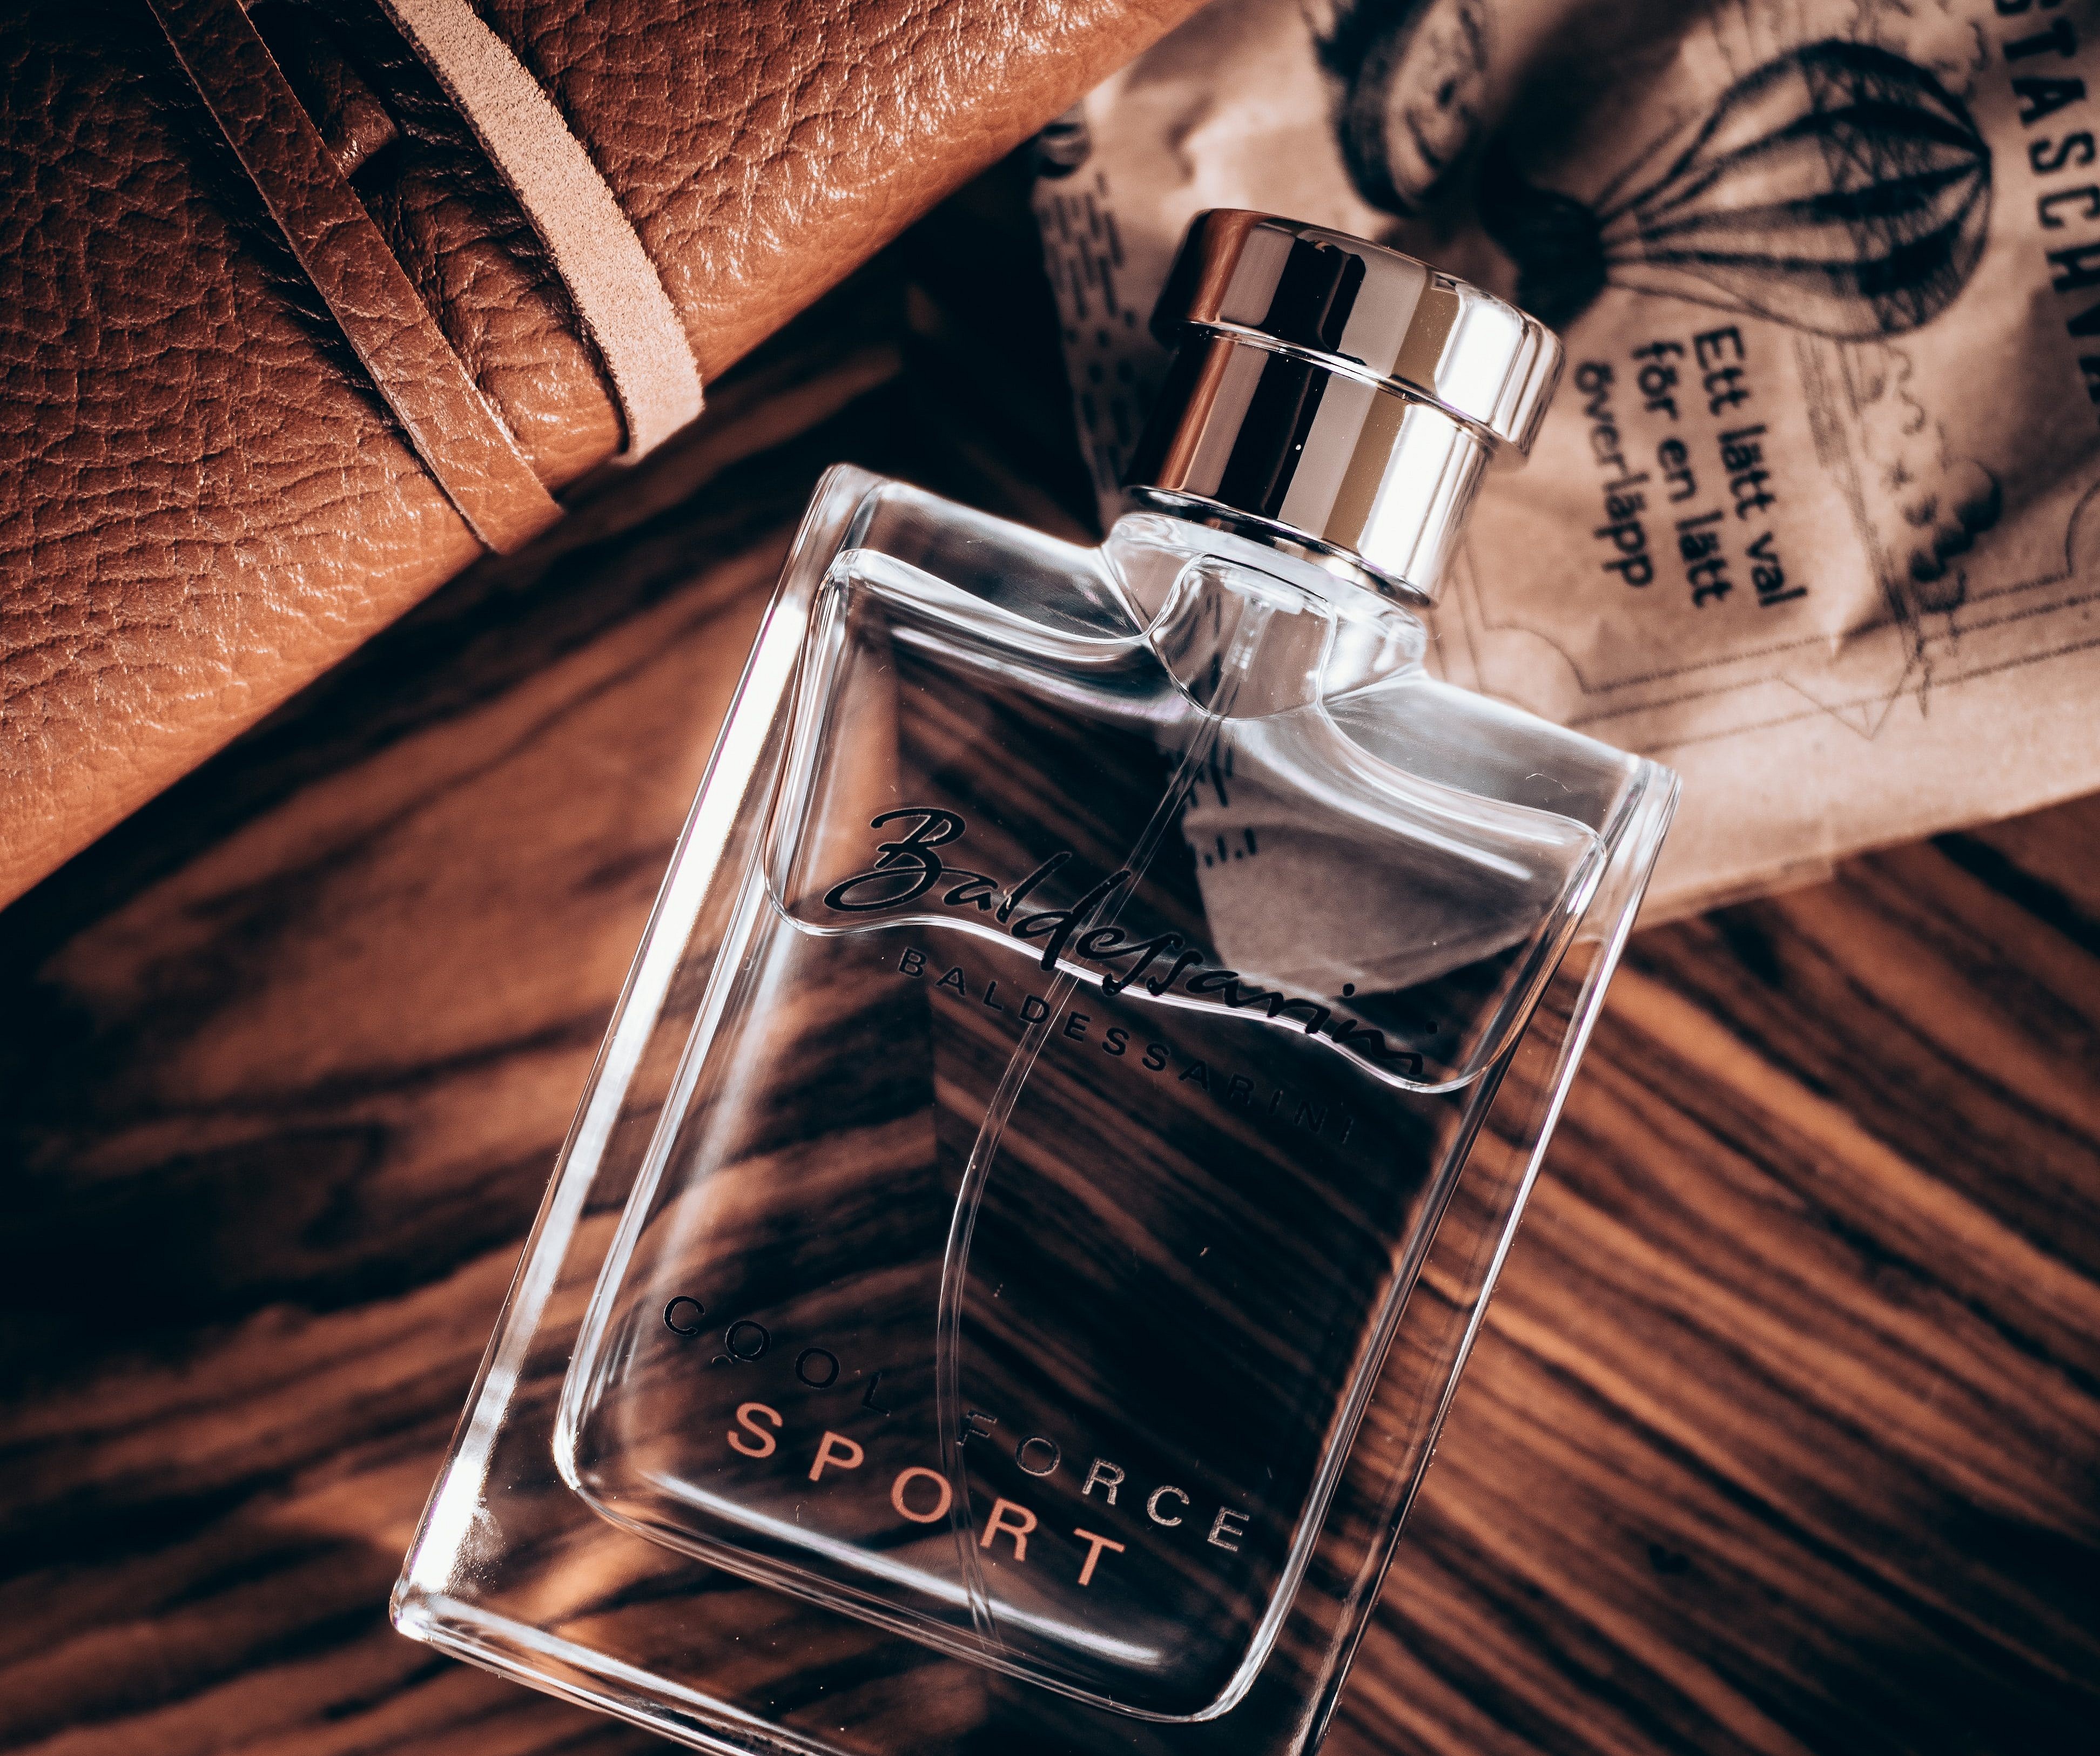 Heaven scent â€“ Top 5 Leather Scents - Real Leather. Stay Different.Real  Leather. Stay Different.